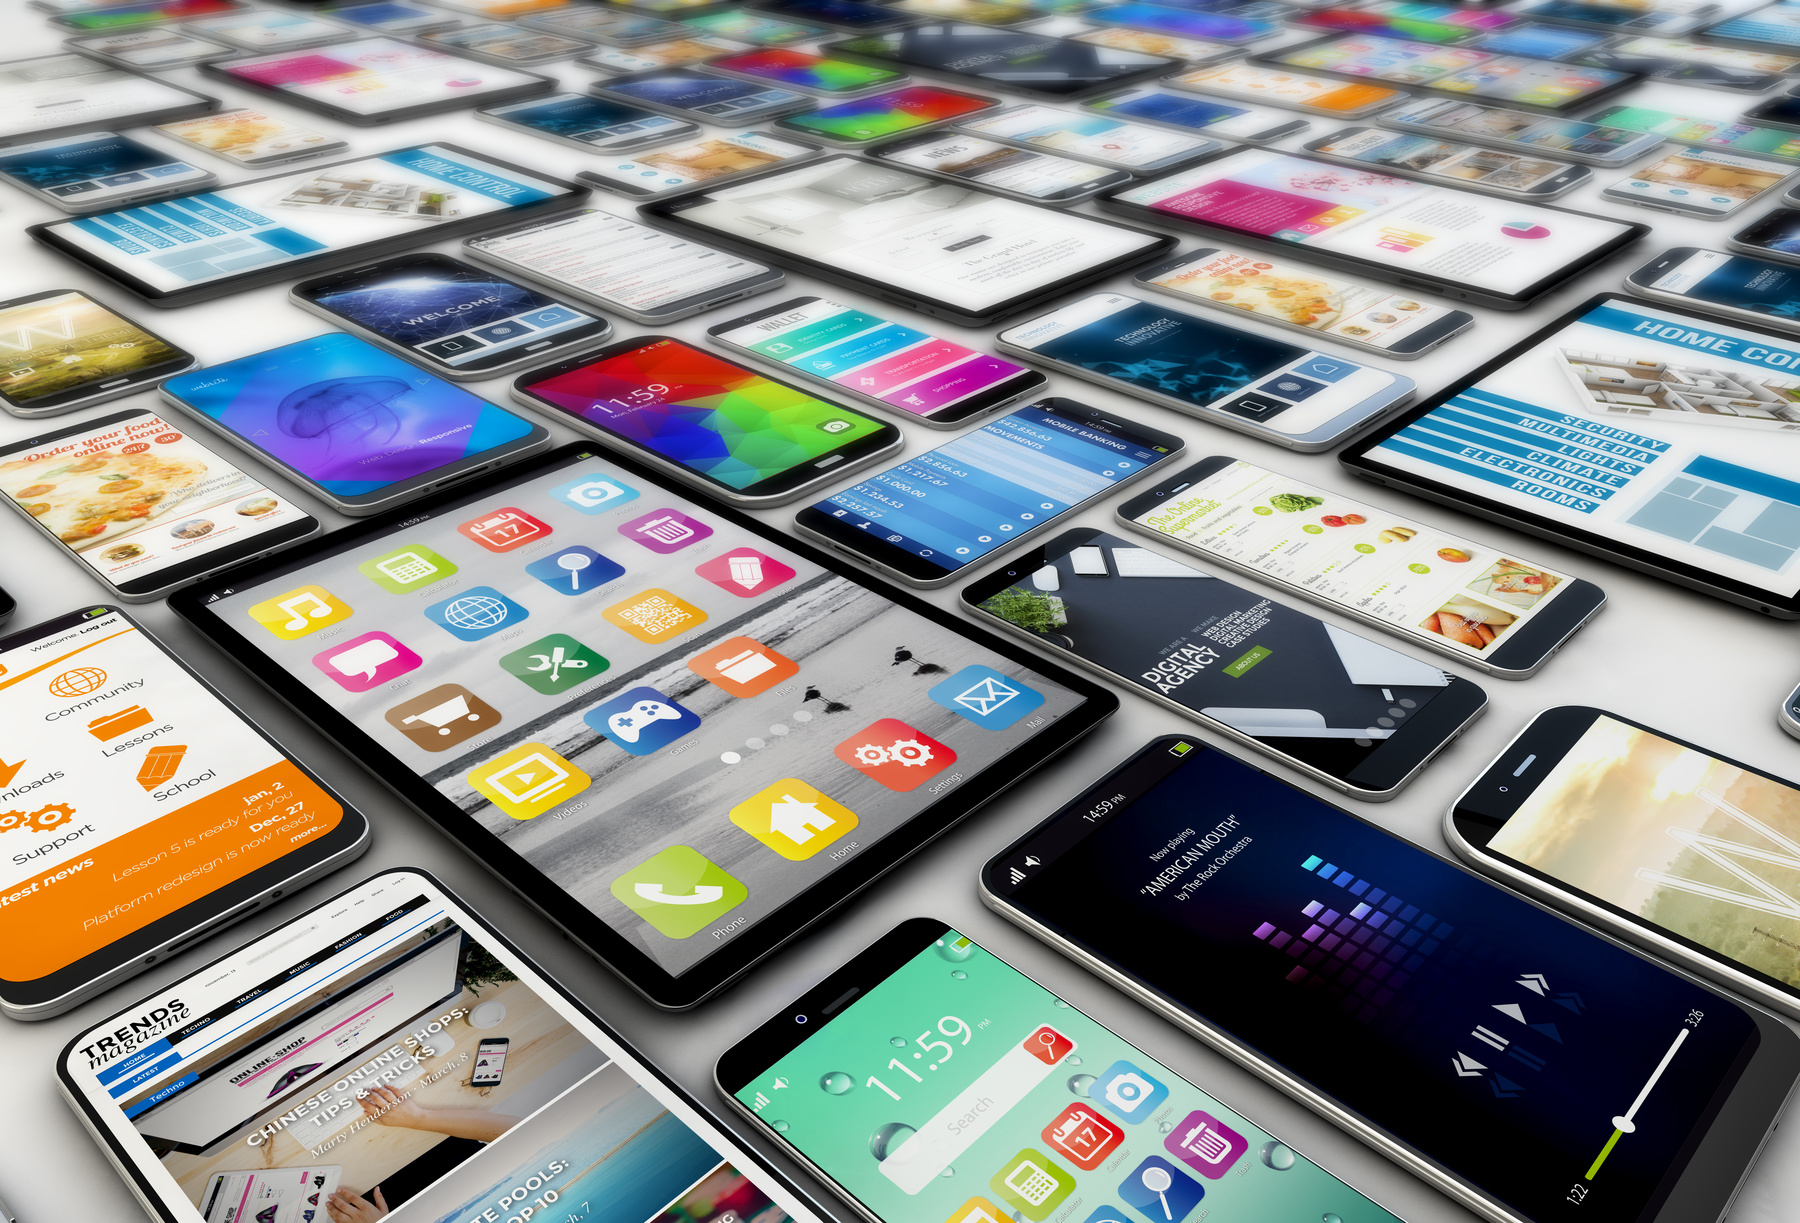 Top 10 Mobile App Technologies Your Business Should Implement Immediately